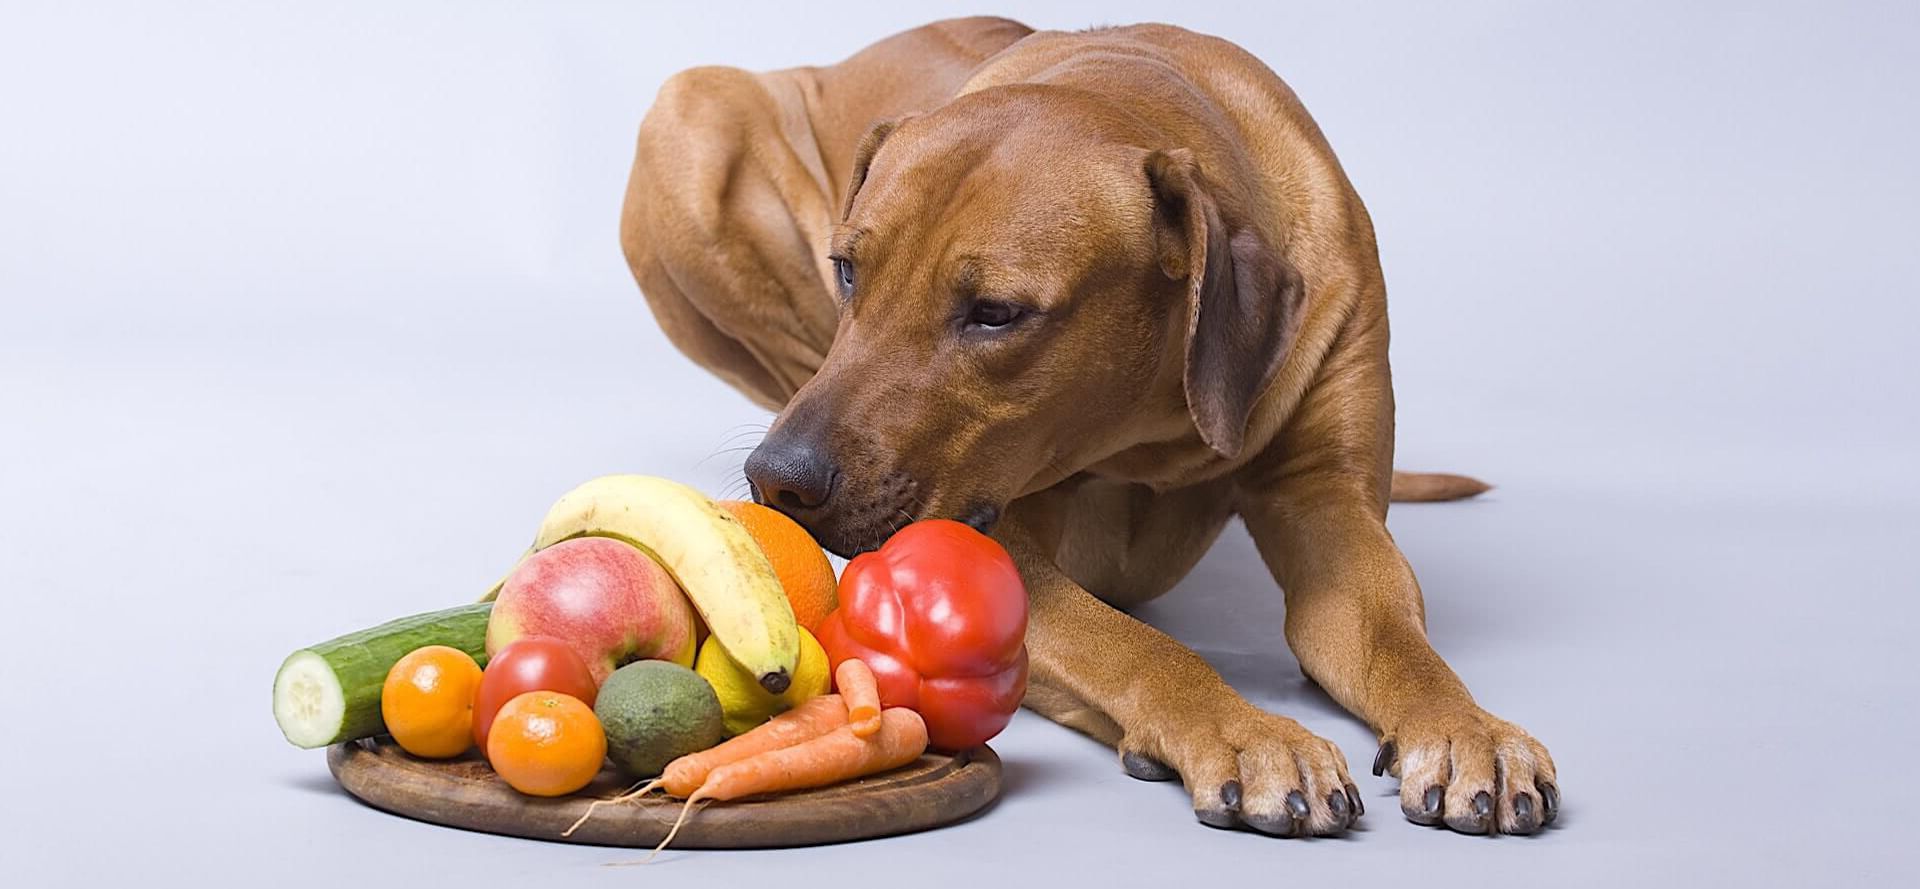 Dog And Useful Vegetables Like Carrot And Cucumber.